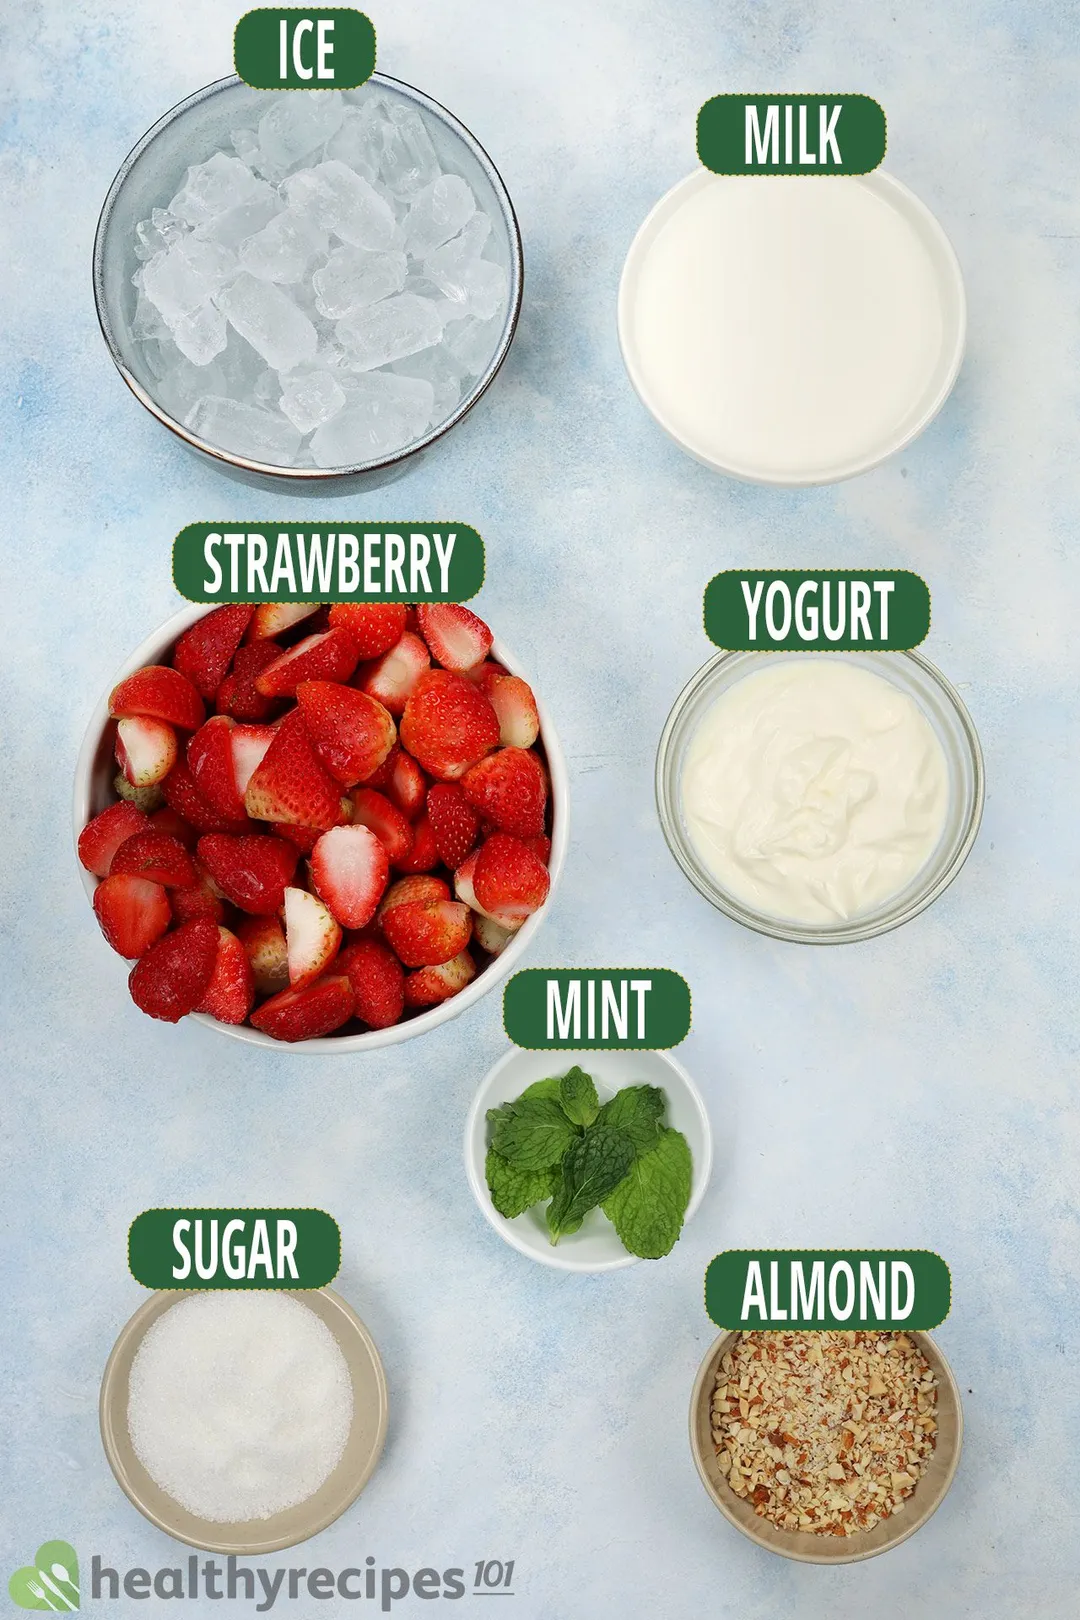 Ingredients for strawberry smoothie, including sliced strawberries, mint leaves, ice, and other smoothie essentials.